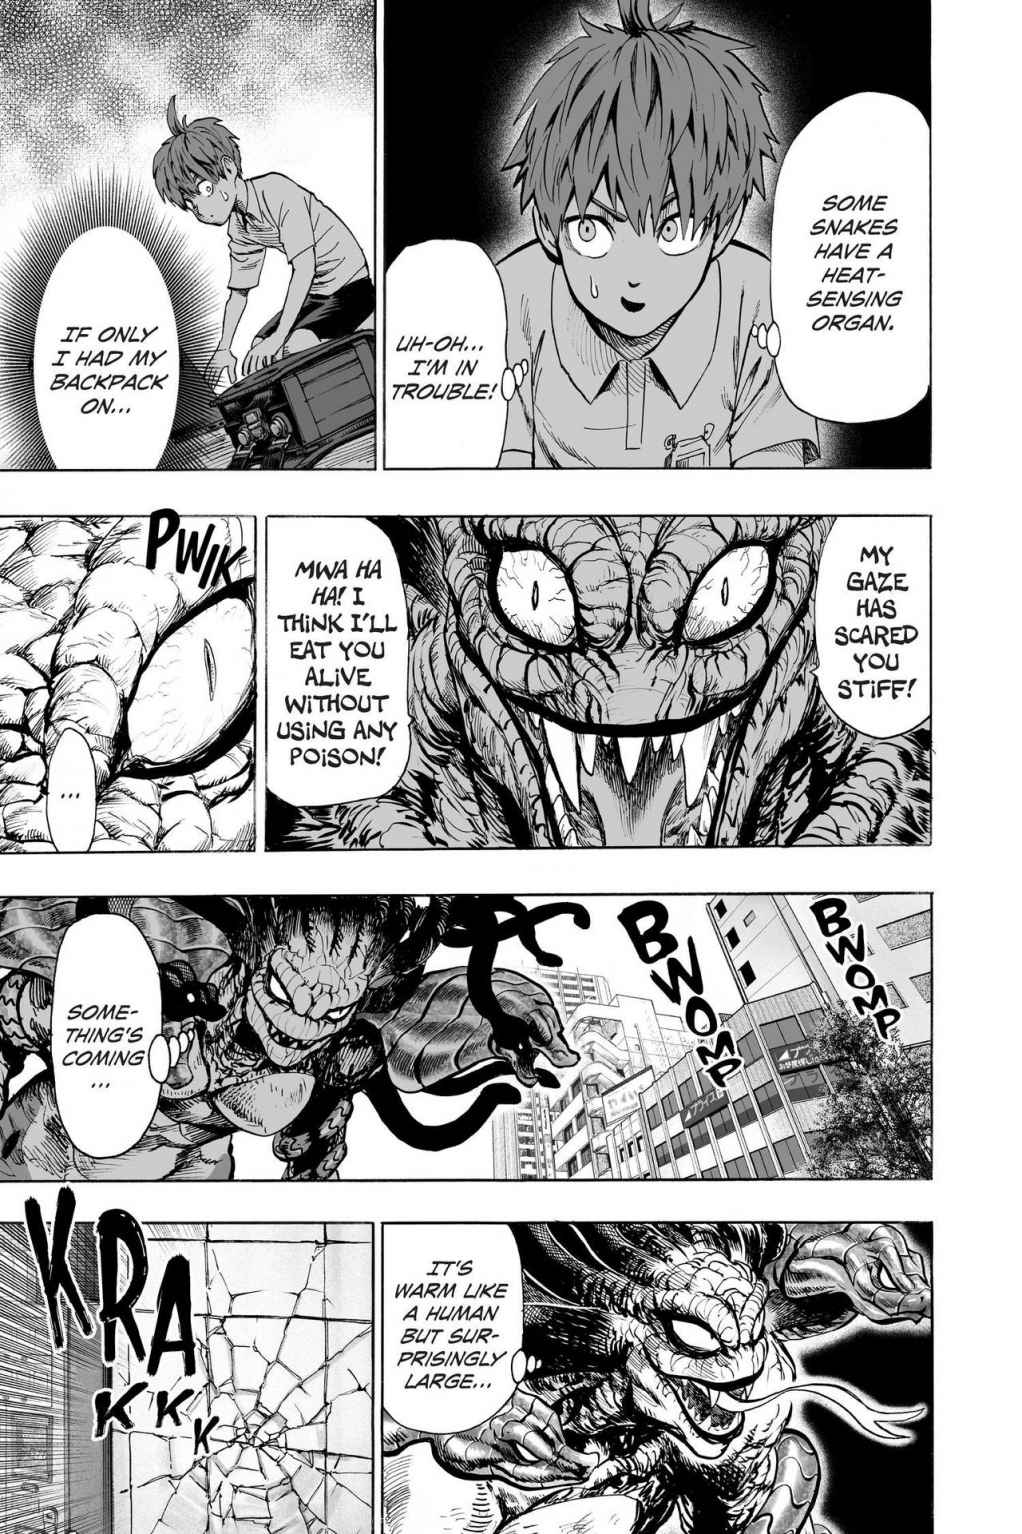 One-Punch Man, Punch 67 image 19